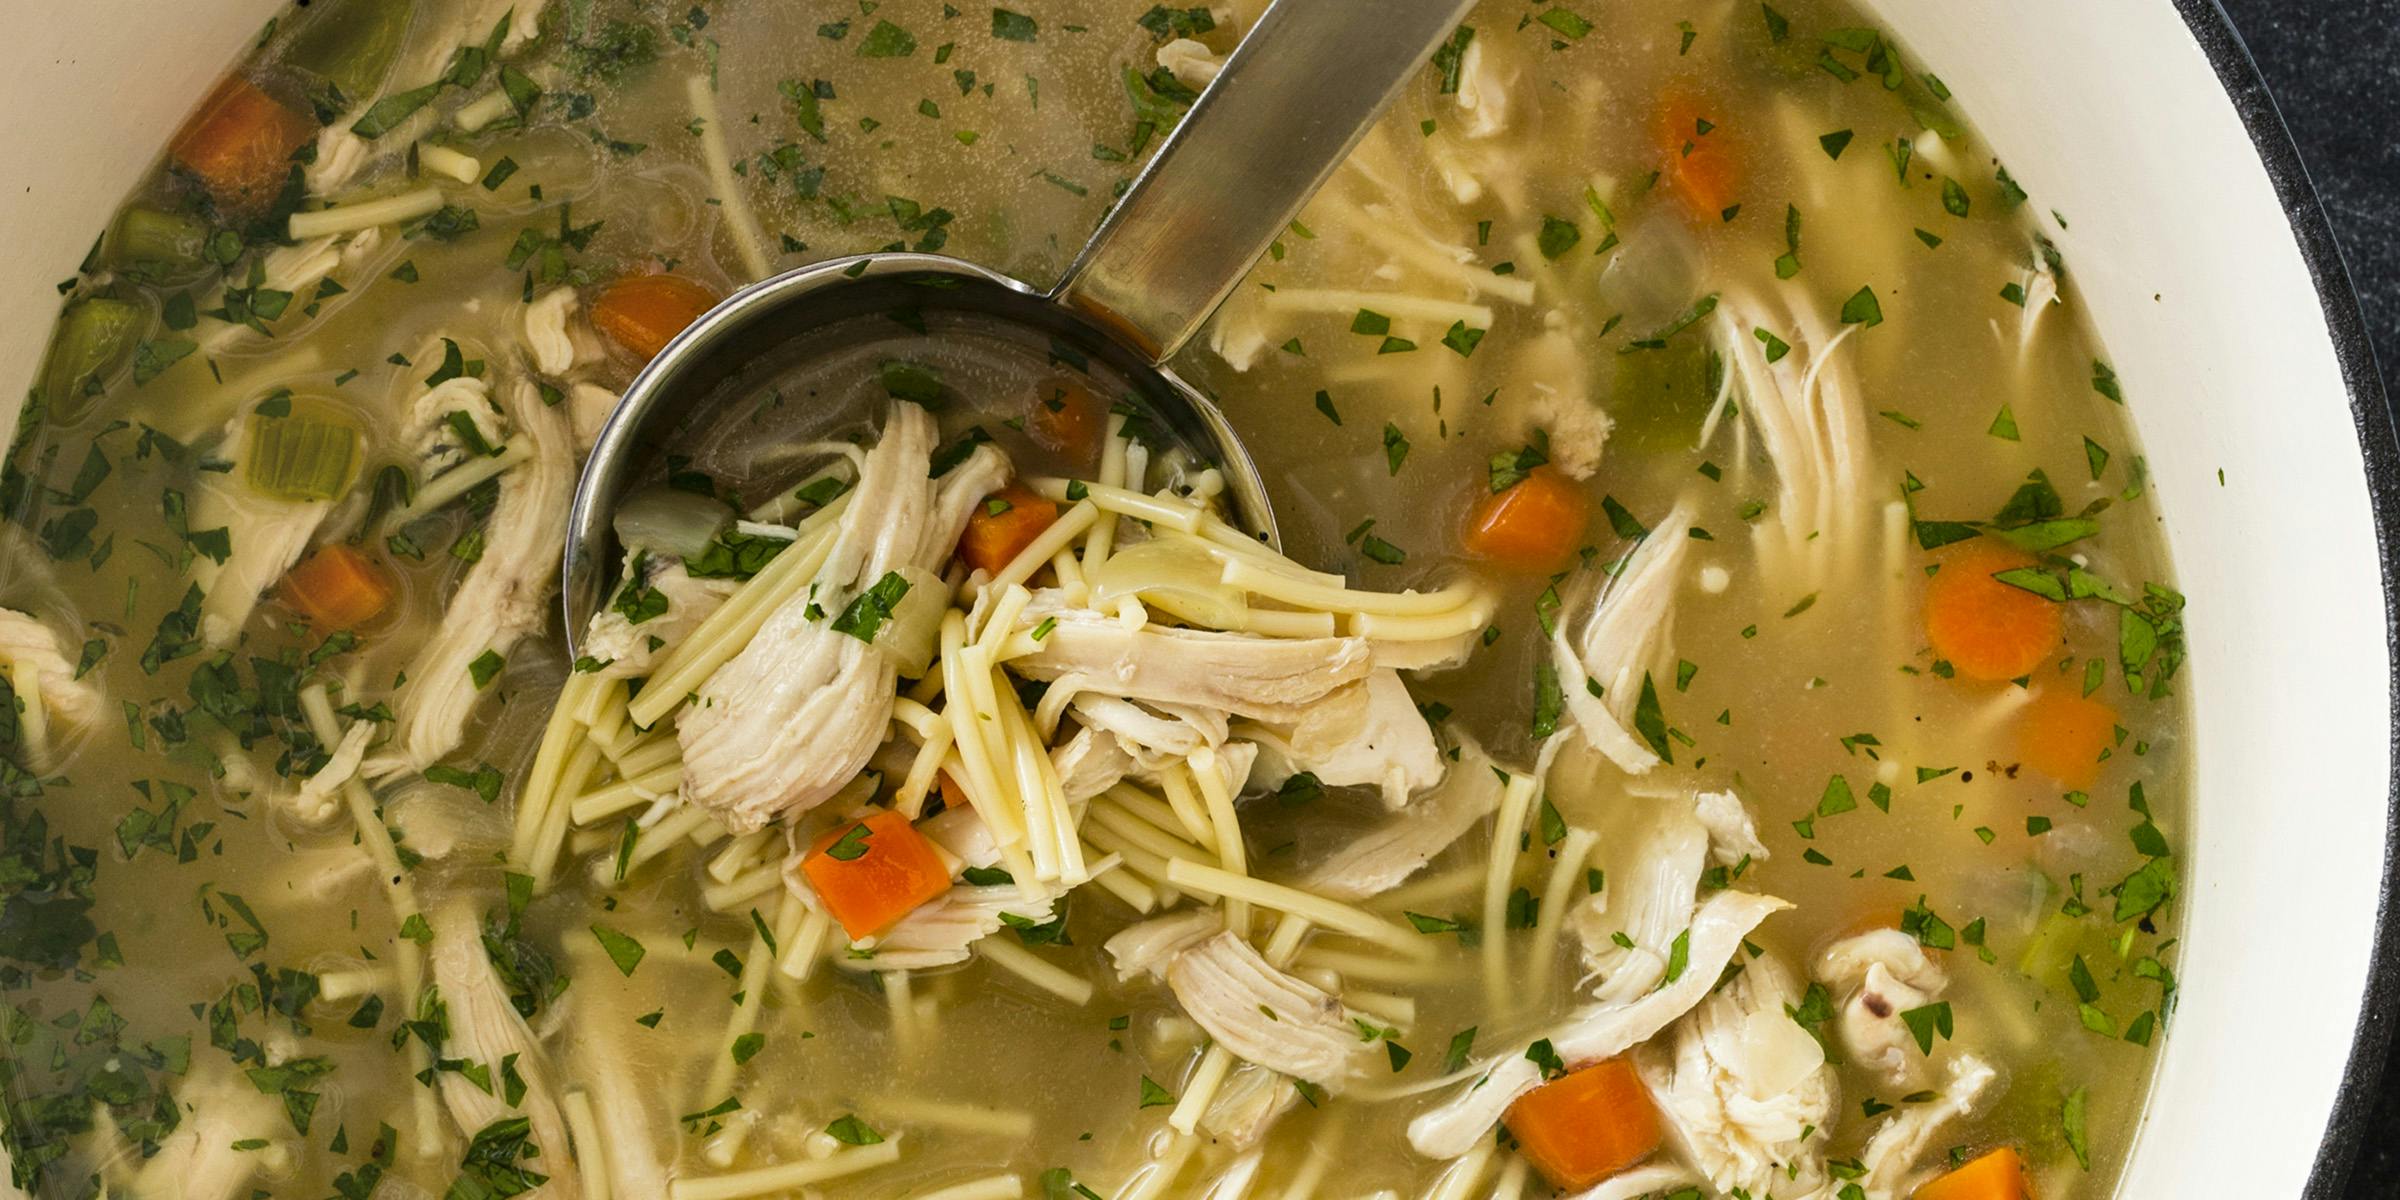 Additional Recipes For Chicken Soup